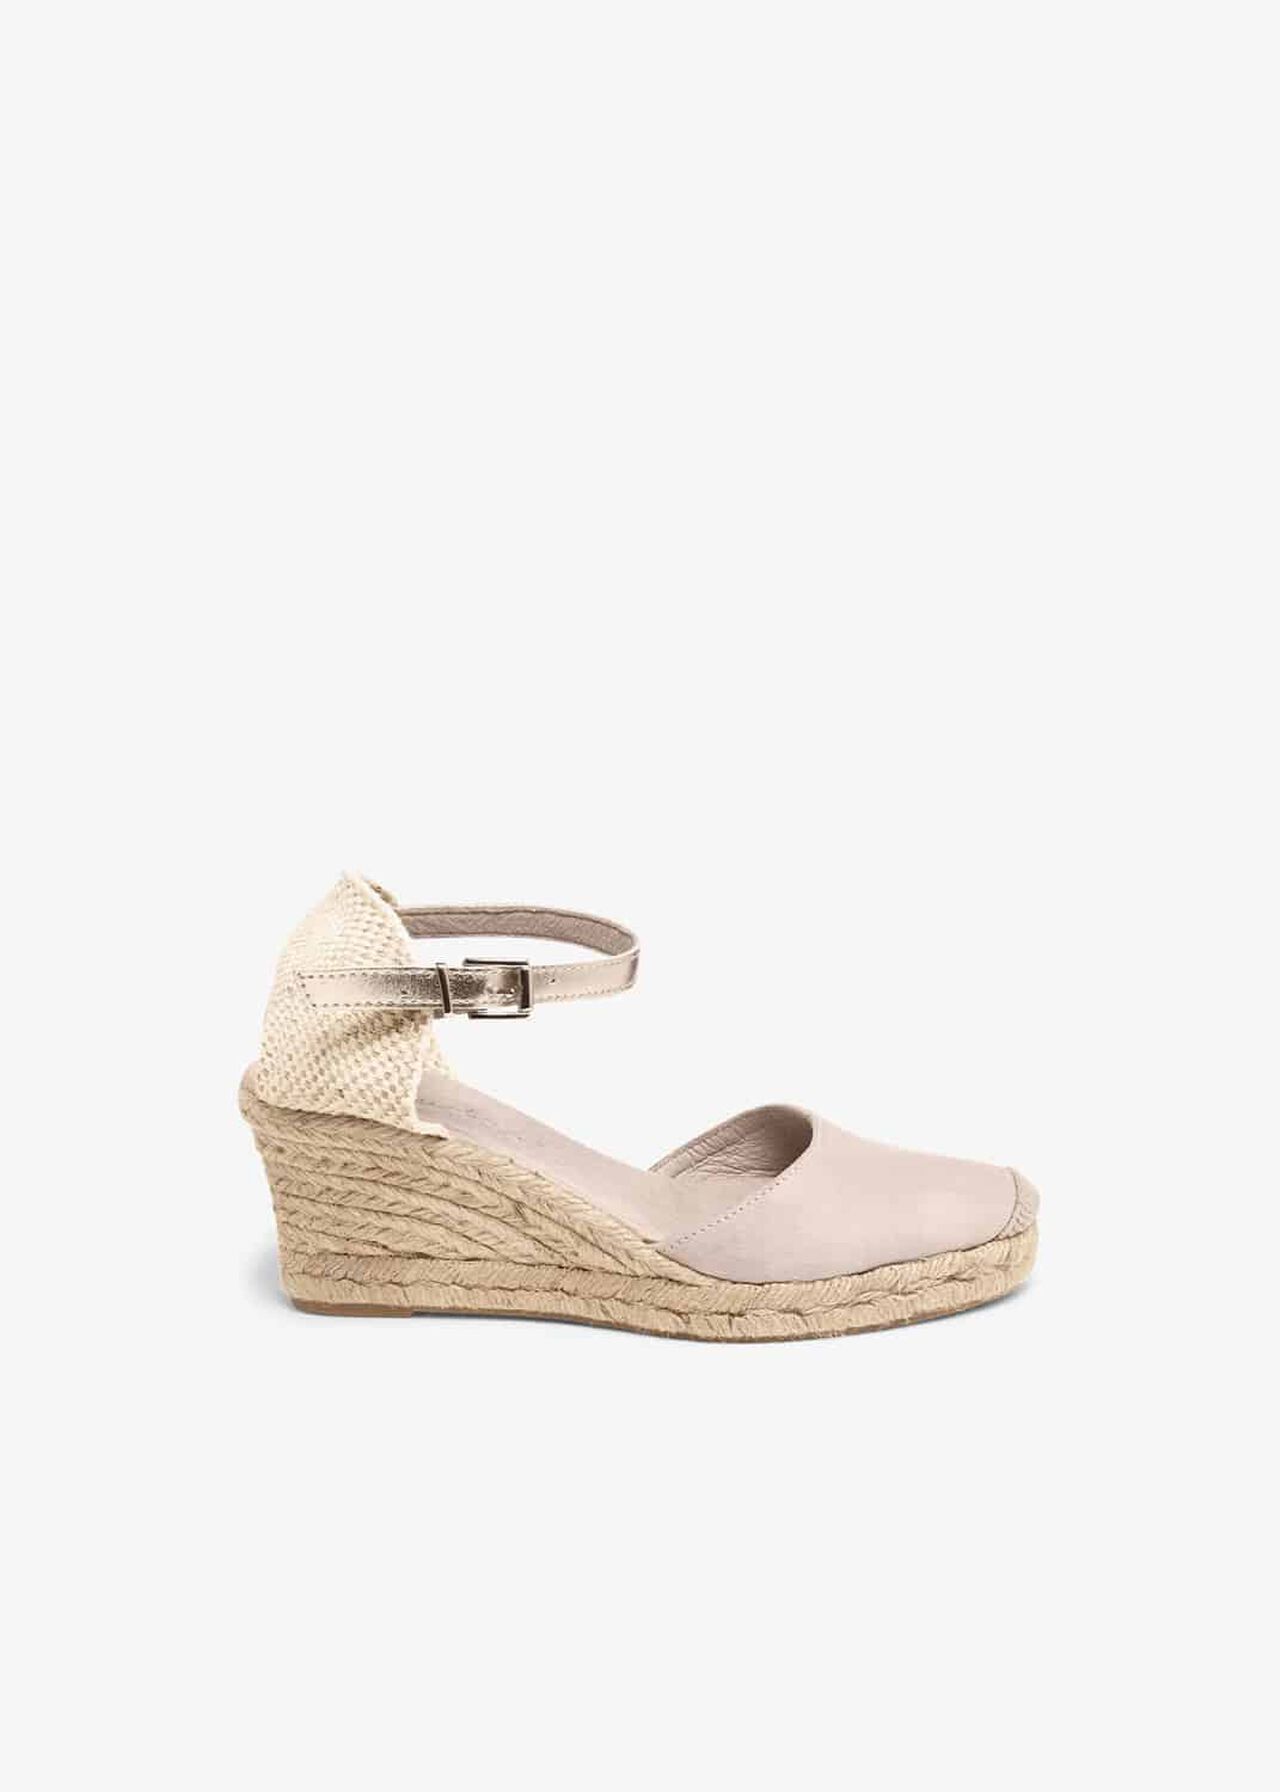 Kimmy Leather Espadrille Wedge Shoes